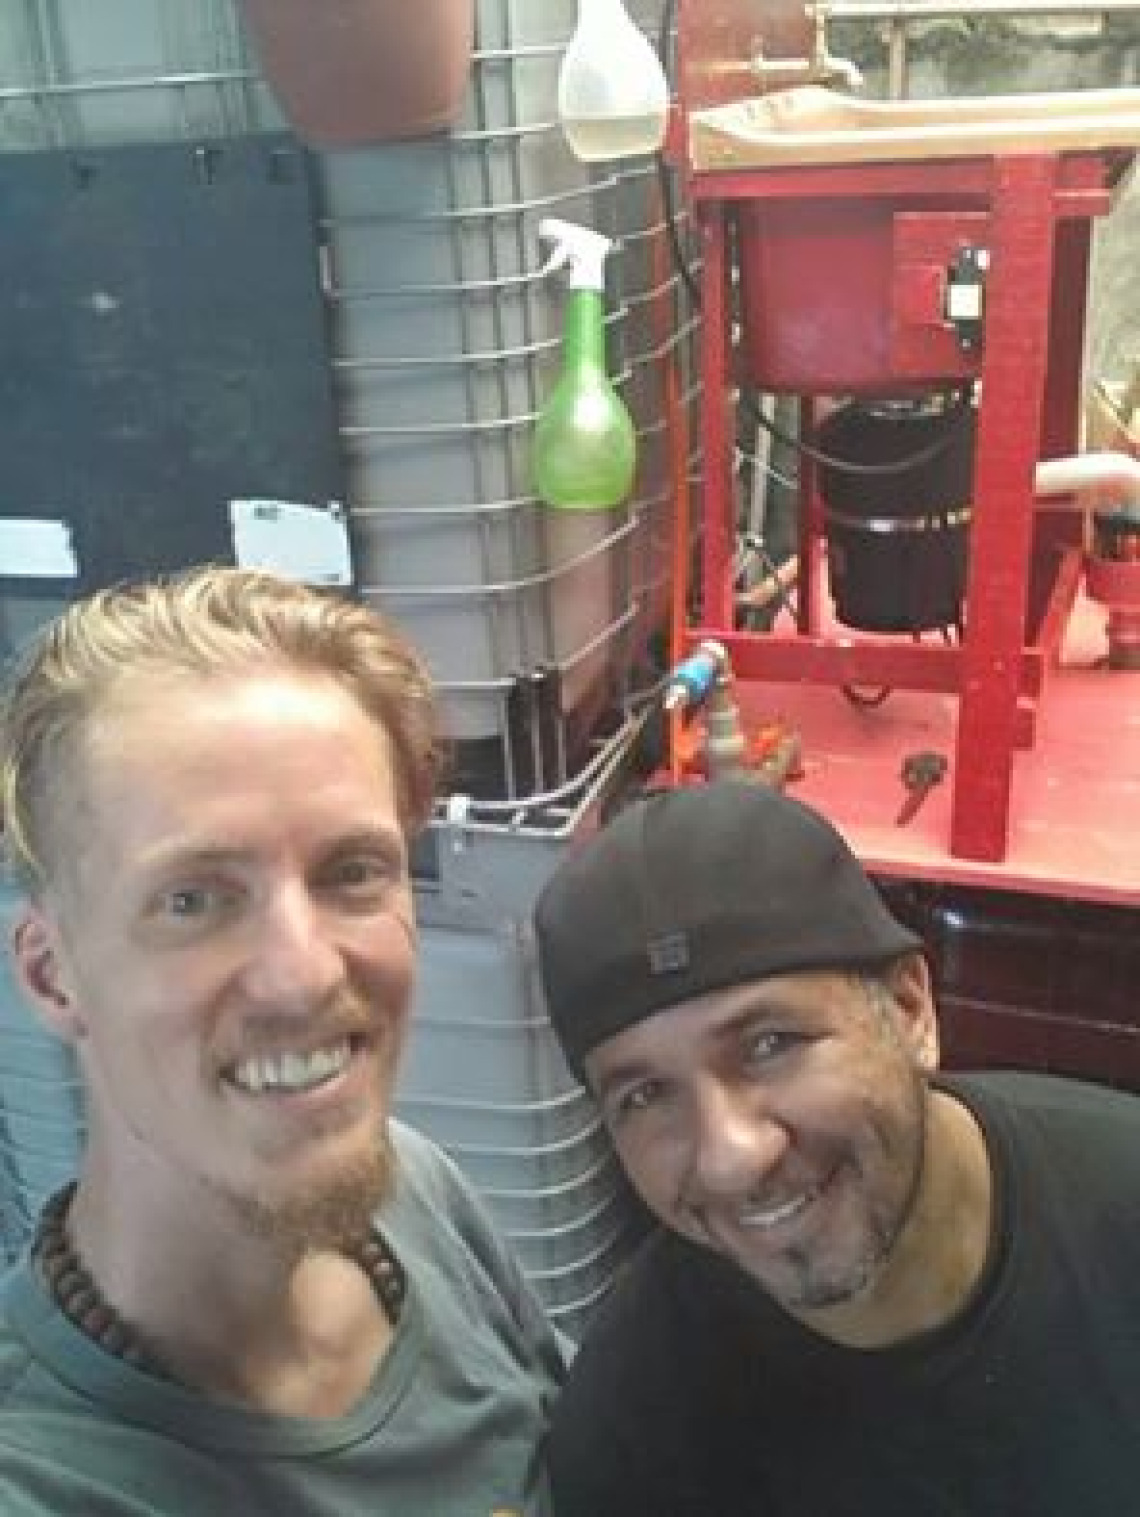 Visionary permaculturists Paulo Mellett and Fabio Poesia Sambasoul in front of their Insinkerator and Solar CITIES biogas system in Sao Paulo